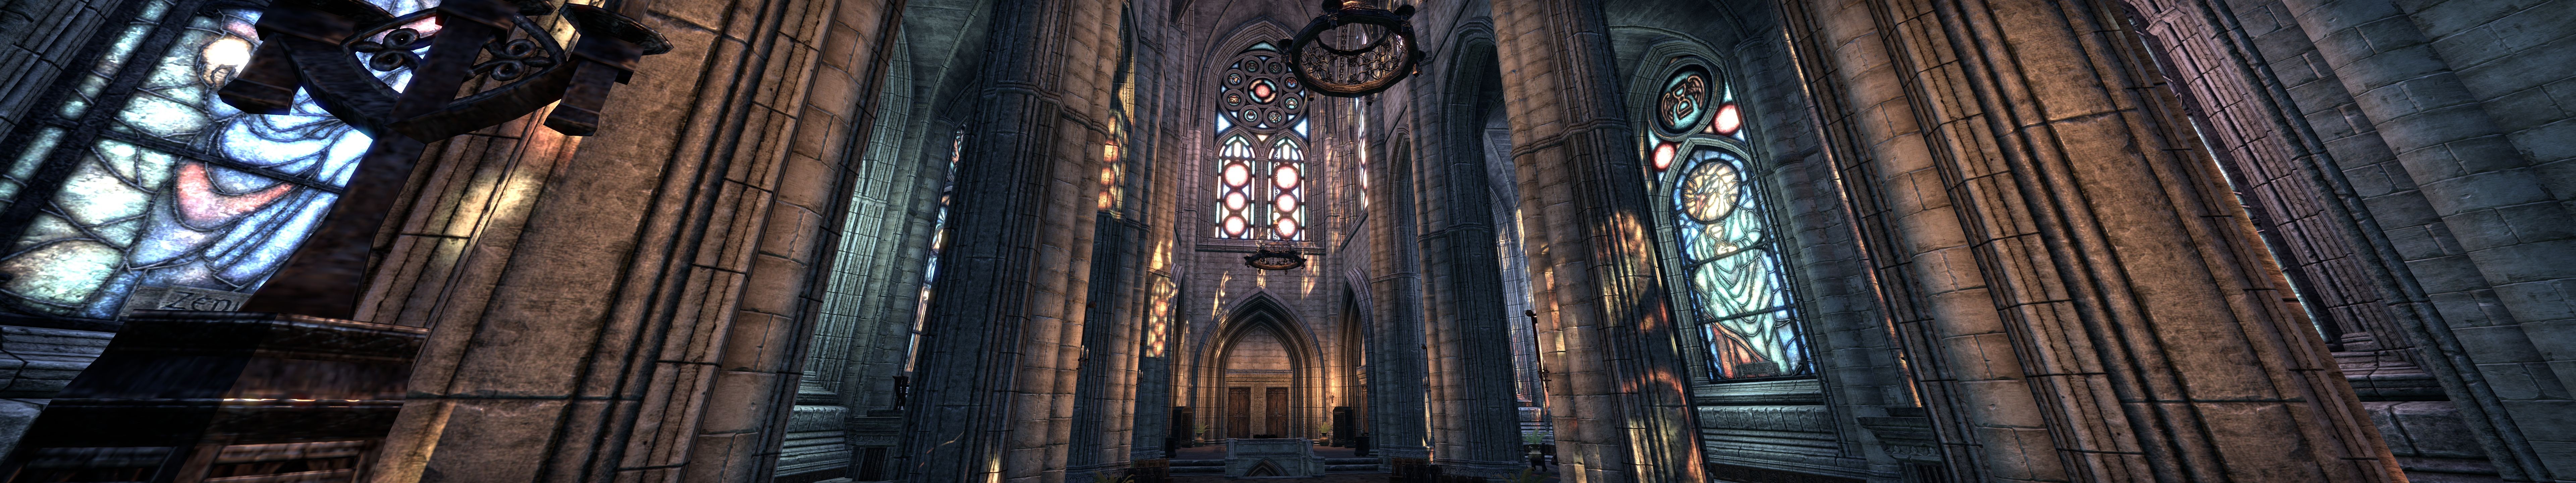 General 7680x1440 The Elder Scrolls Online quadruple monitors church cathedral RPG PC gaming video games